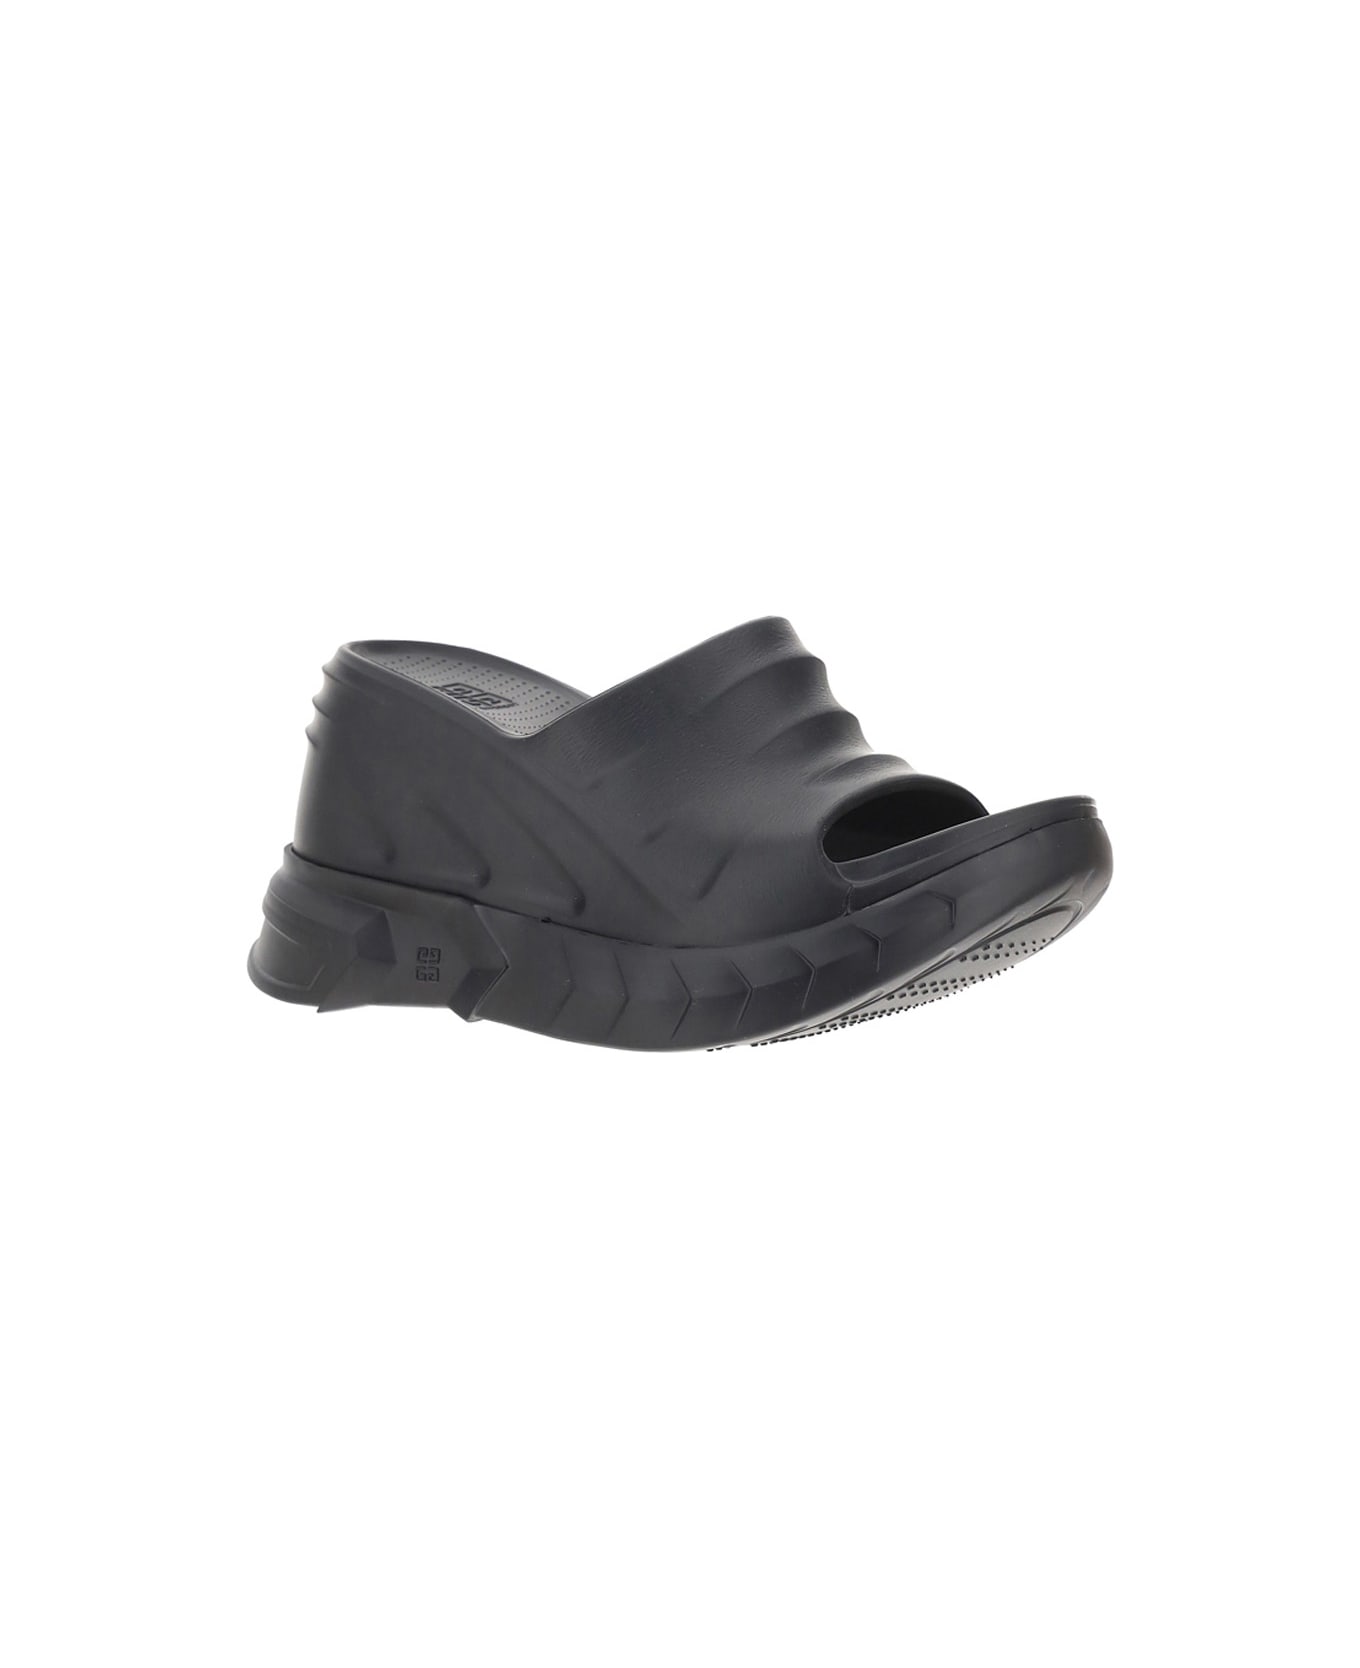 Givenchy Marshmallow Wedge Sandals - Black